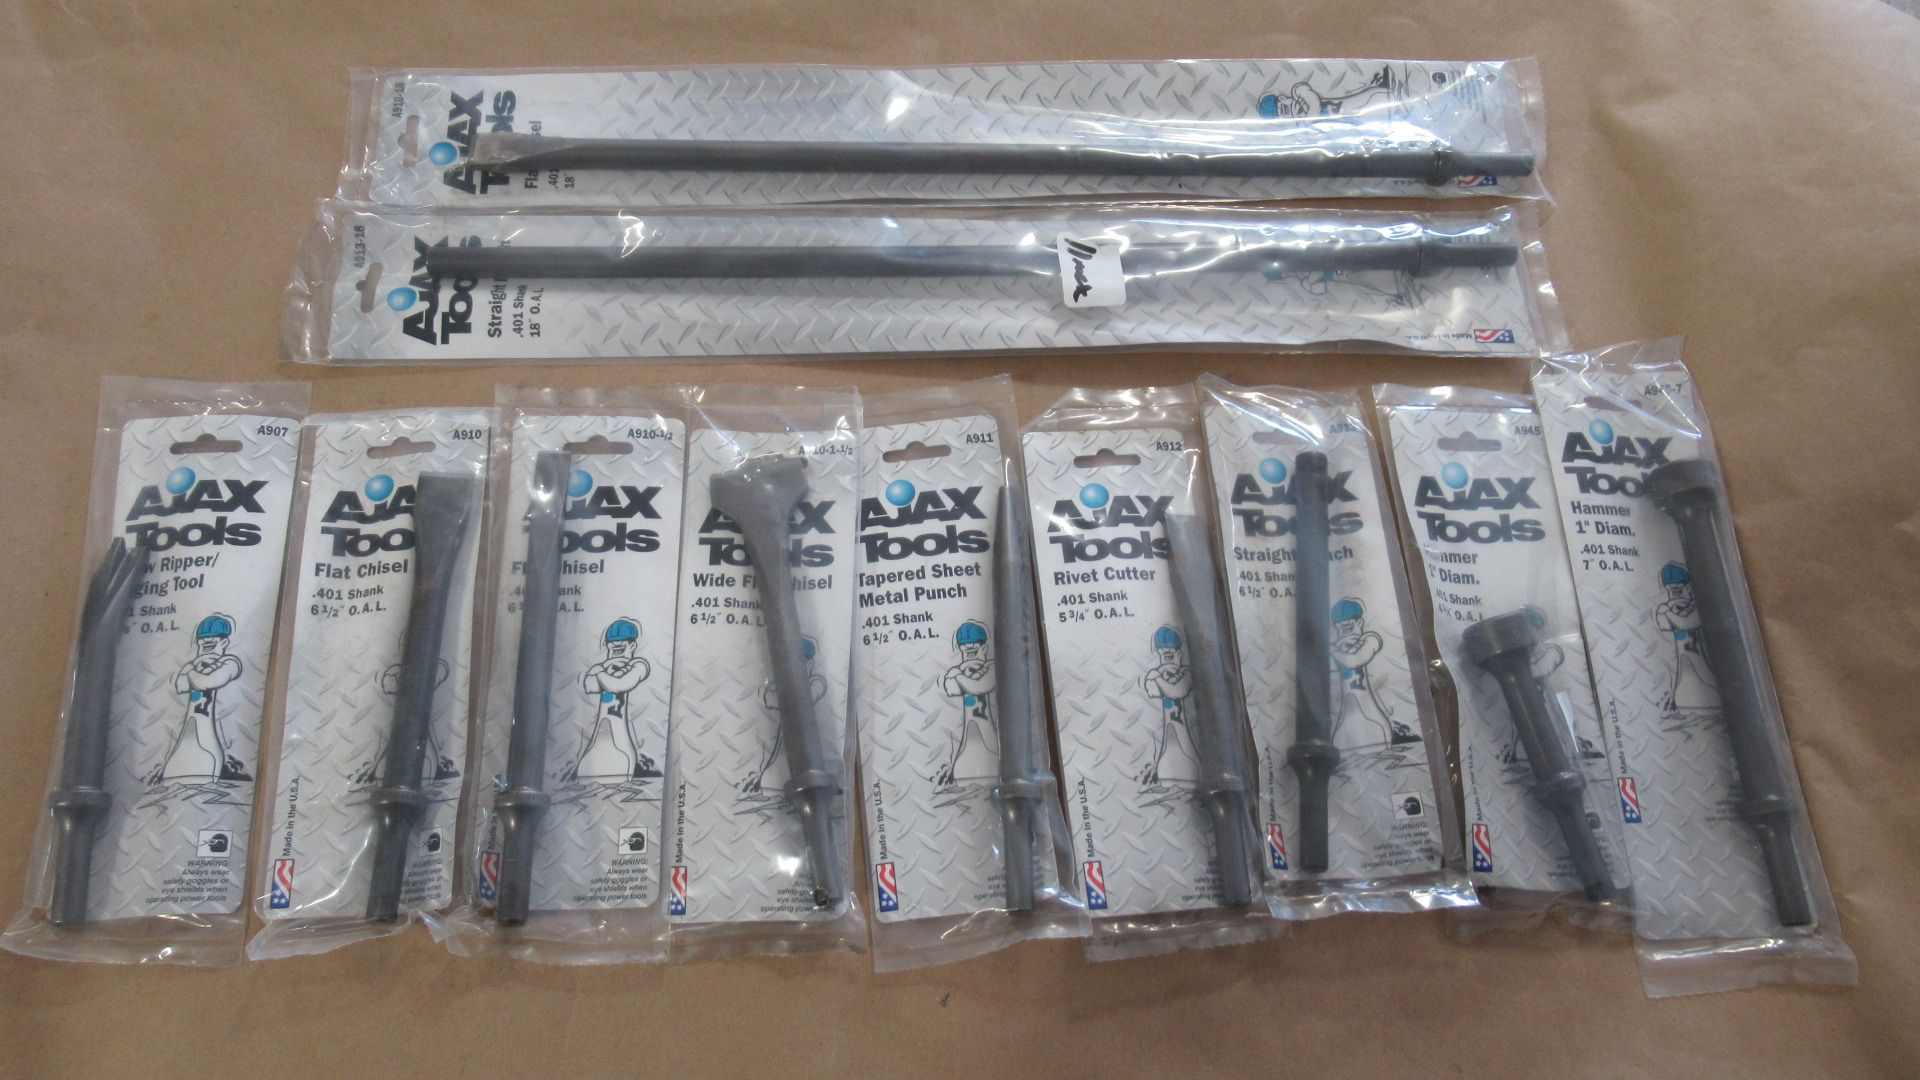 LOT OF 11 CHISELS & PUNCHES ASST AJAX TOOLS